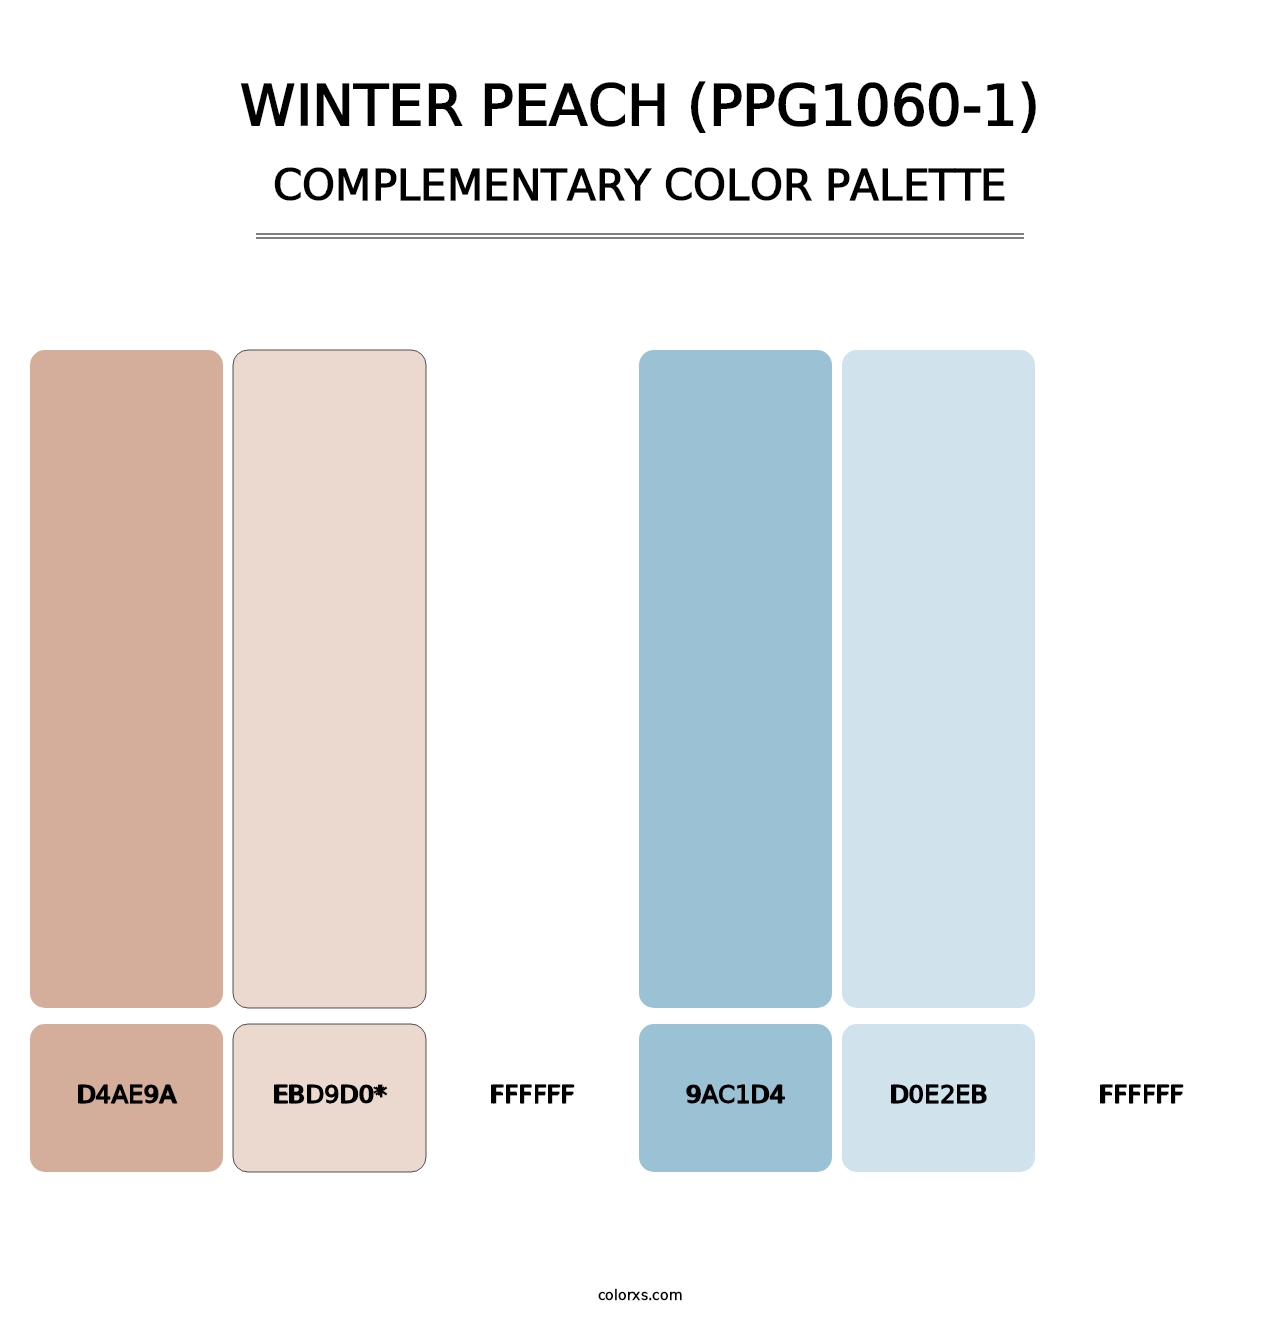 Winter Peach (PPG1060-1) - Complementary Color Palette